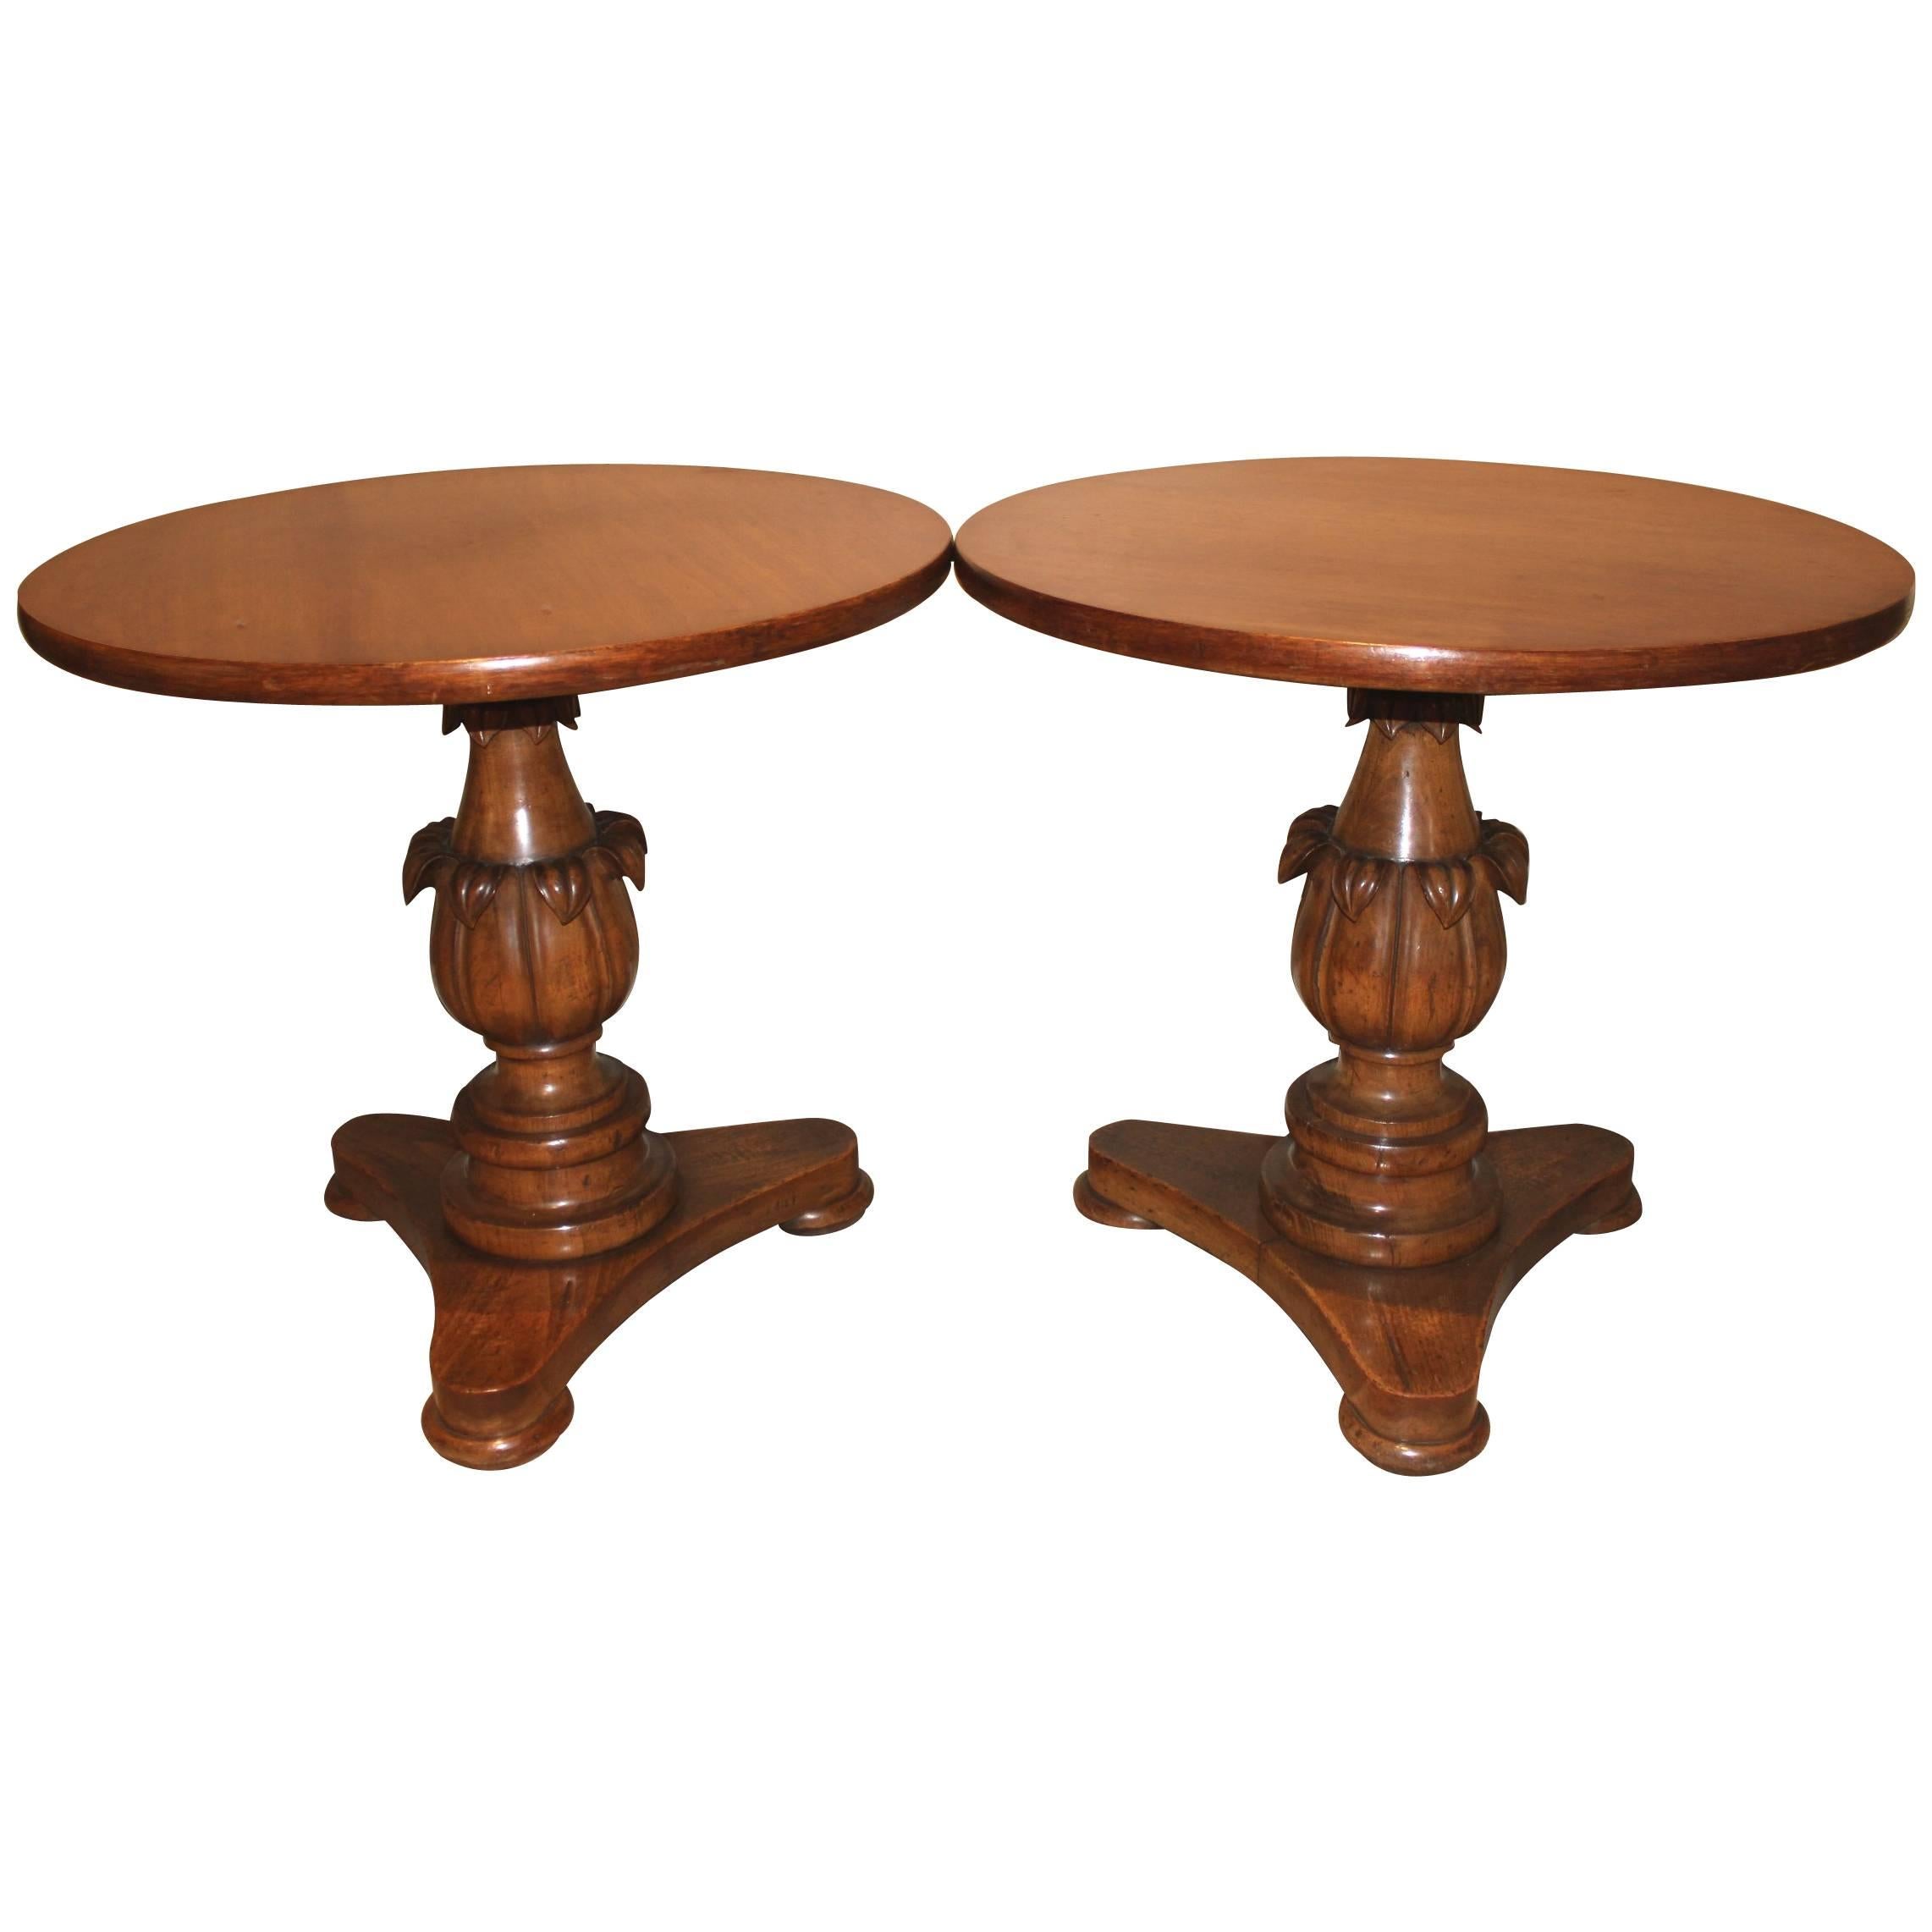 Pair of Victorian Walnut Carved Round Side Tables